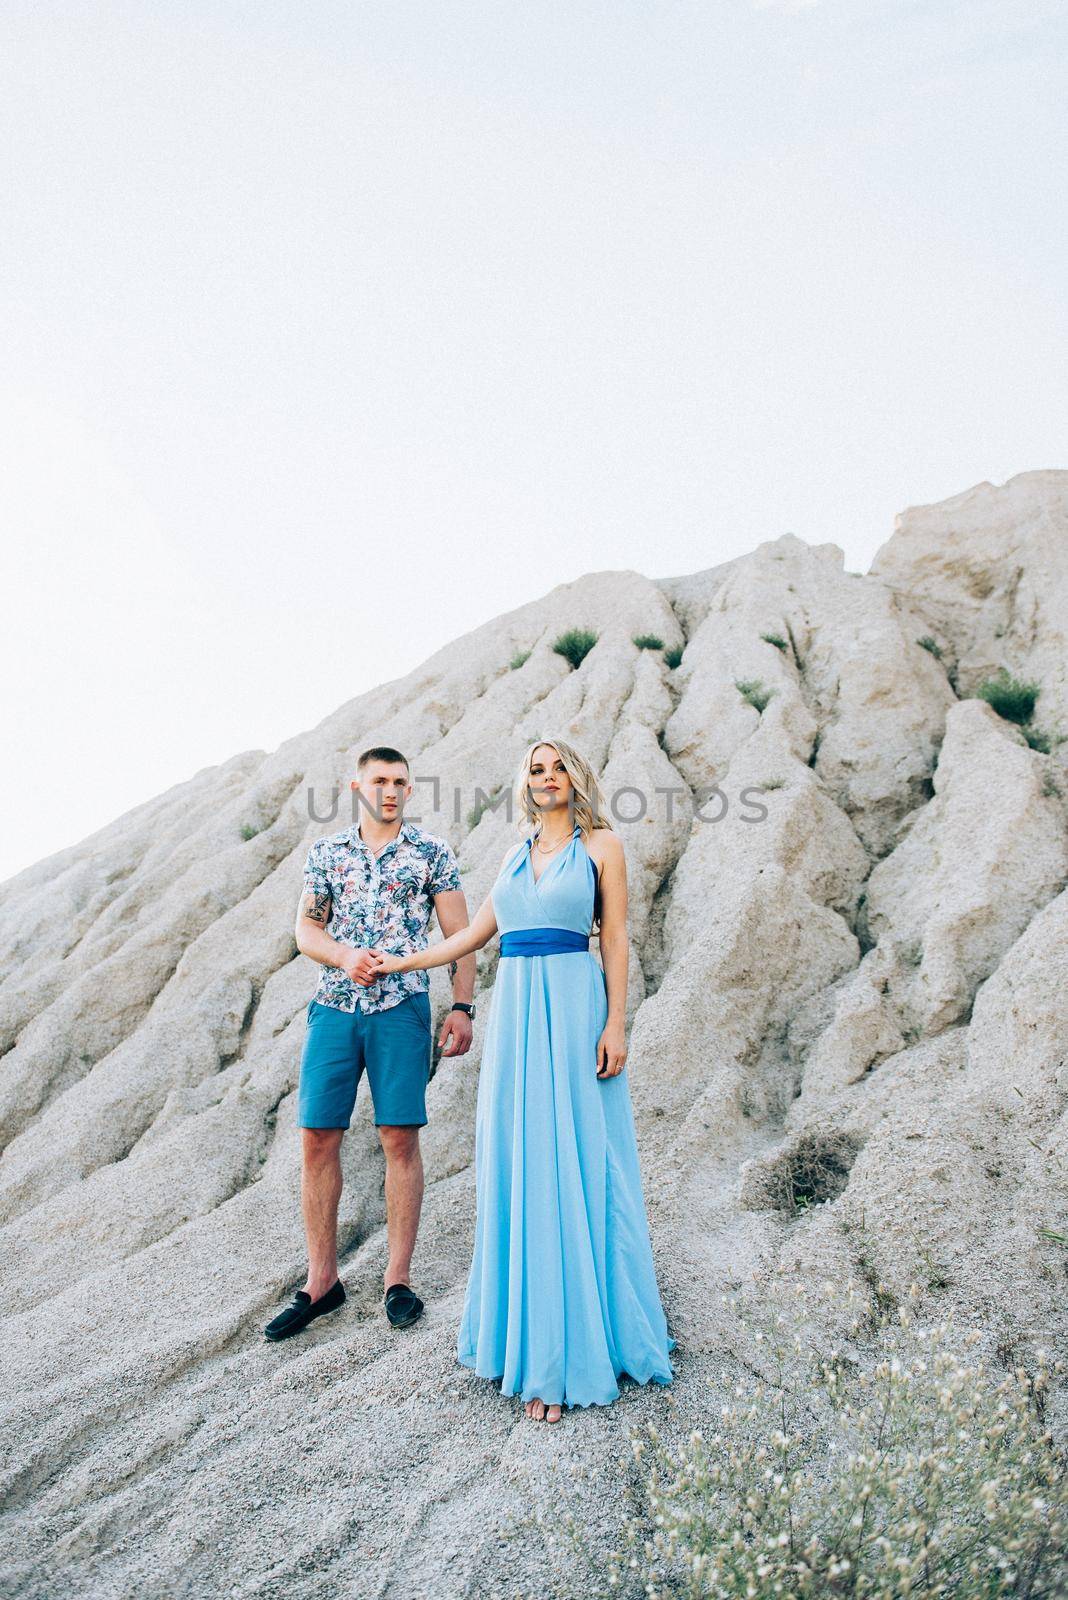 blonde girl in a light blue dress and a guy in a light shorts and short shert in a granite quarry